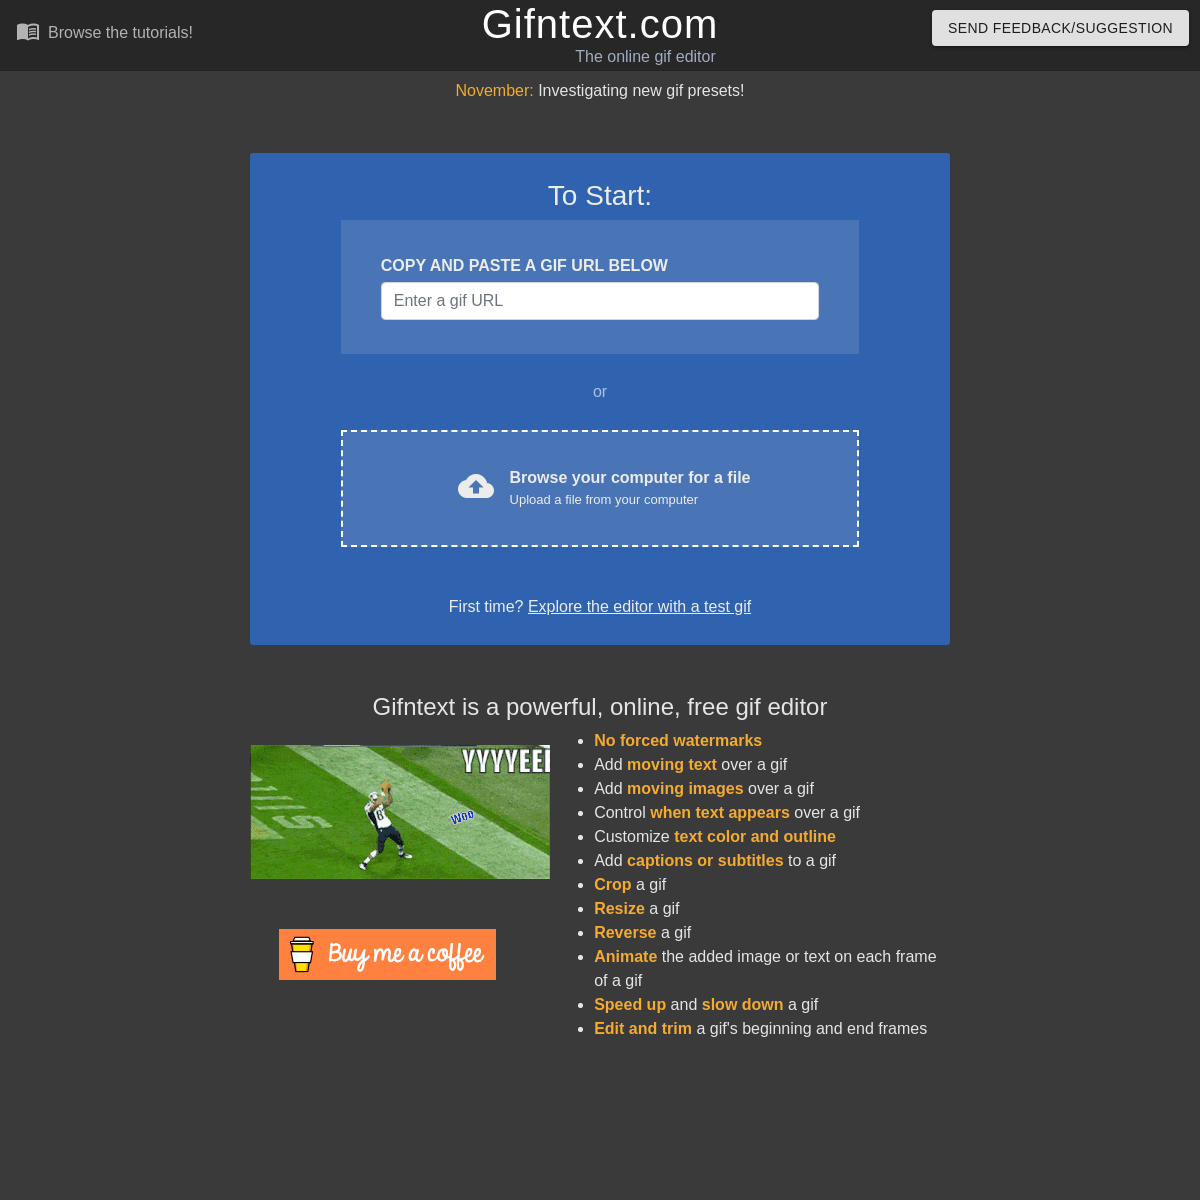 A complete backup of gifntext.com